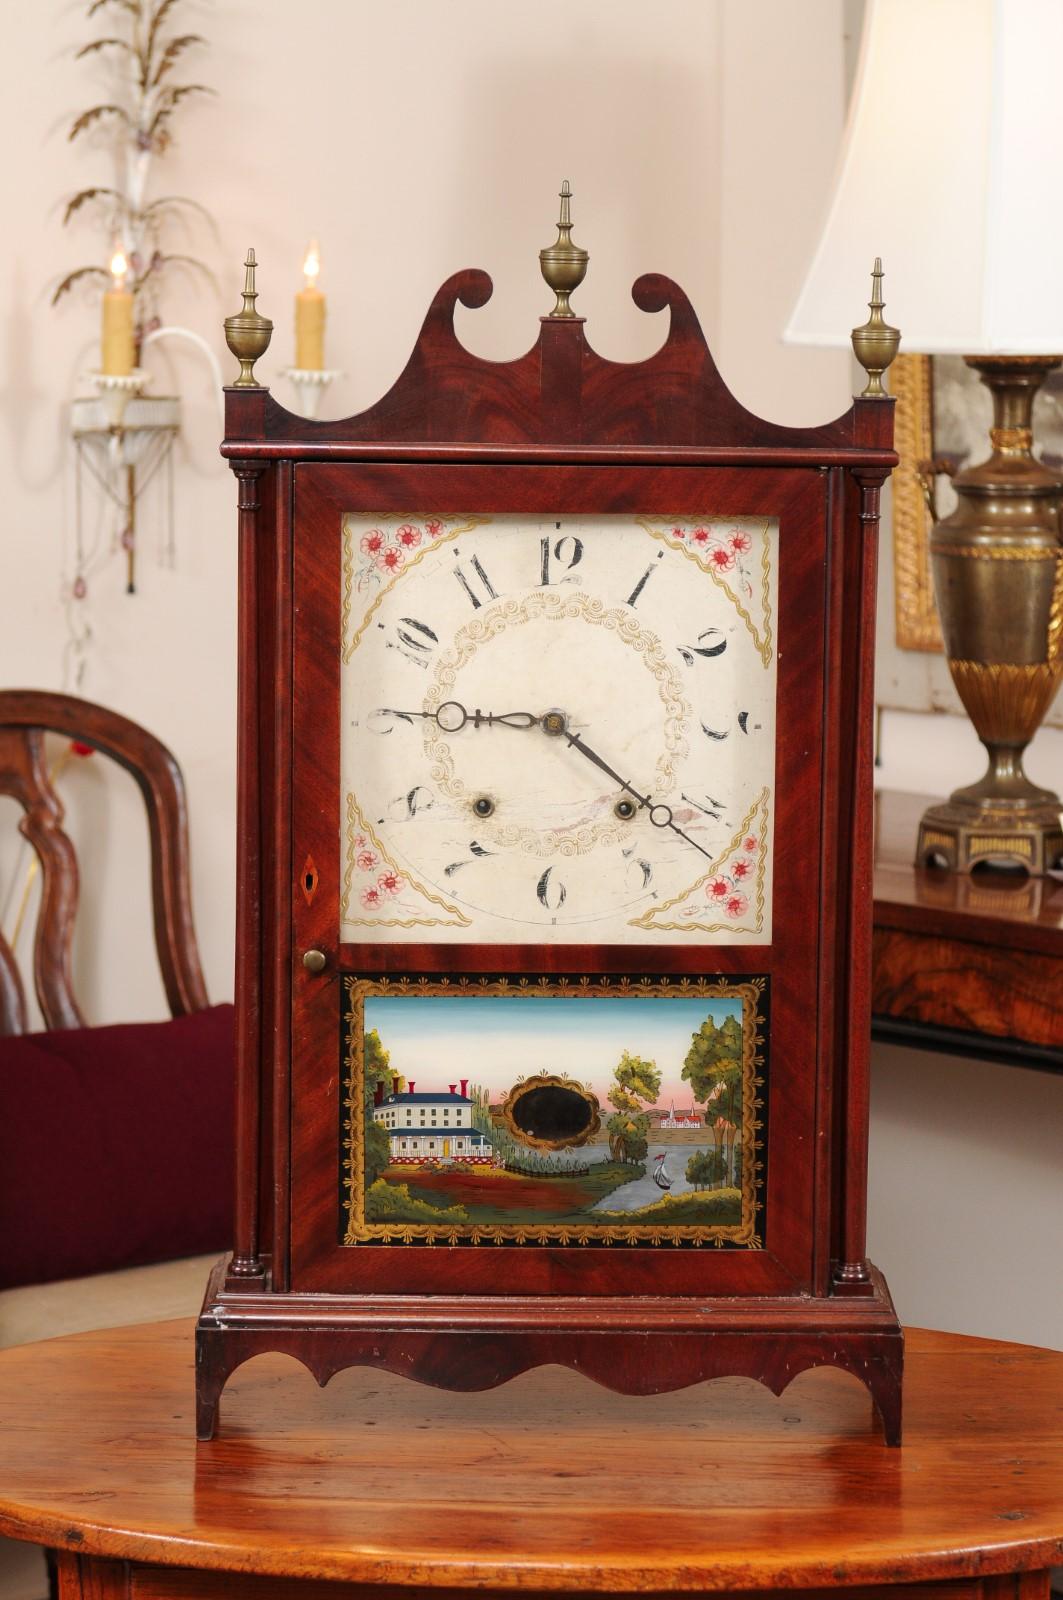 Early 19th Century American Pillar & Scroll Clock in Mahogany with Eglomise Painted Landscape Scene, Eli Terry